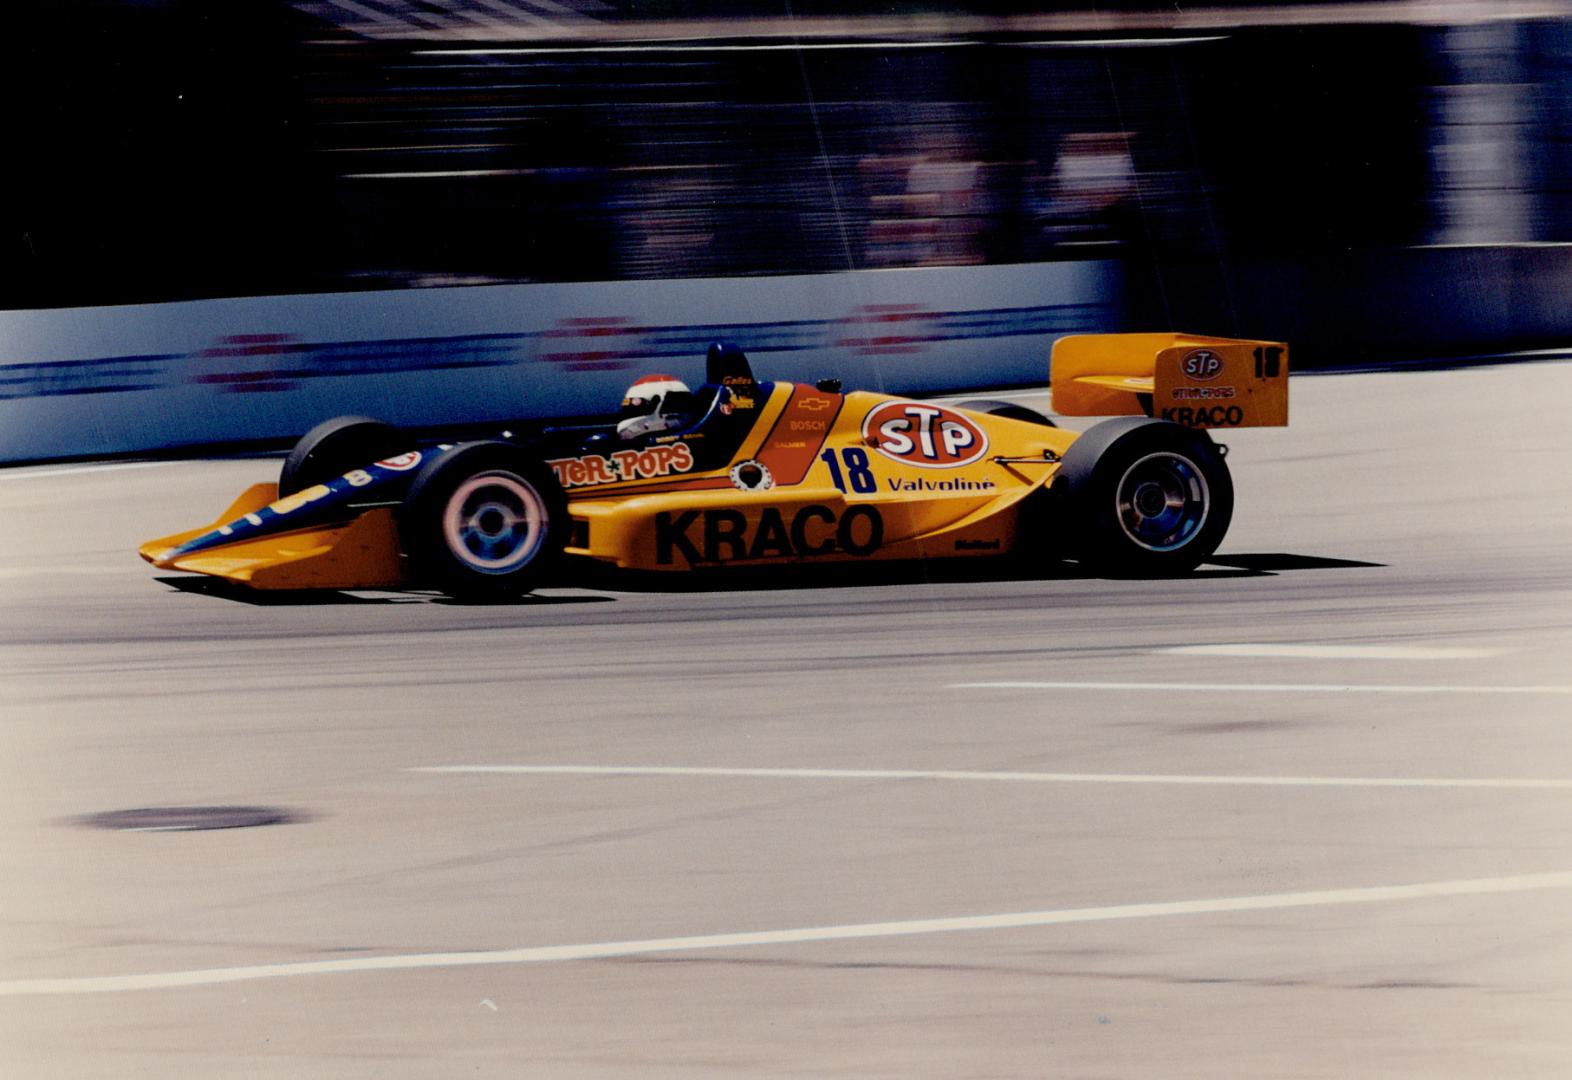 Bobby Rahal: Age, 37, home, Dublin, Ohio, status, married with 3 children, Indy-car victories, 19, car, Lola 90-Chevrolet, team, Galles or Kraco Racing, sponsors, Kraco, STP